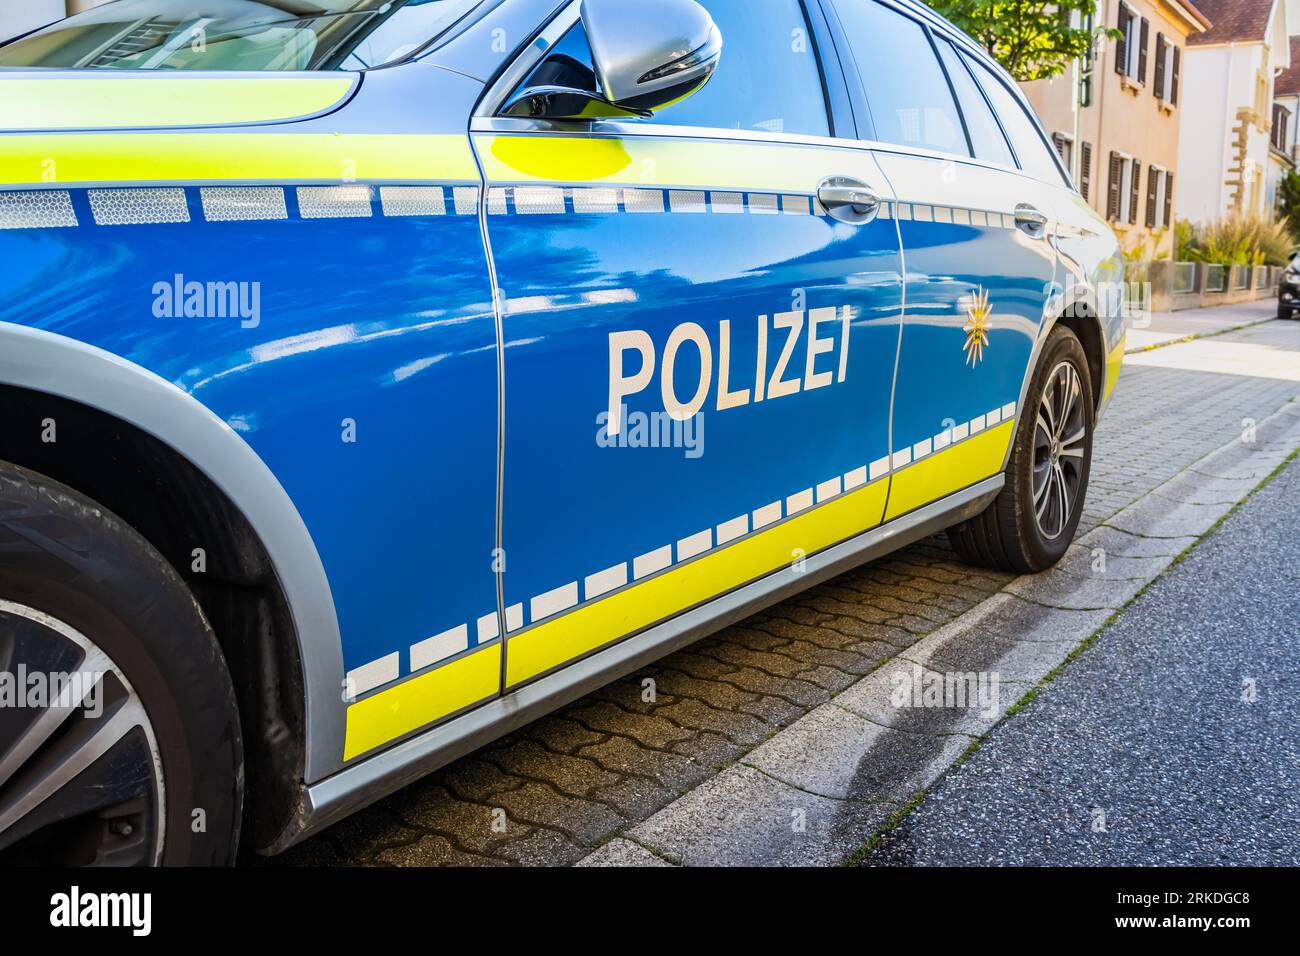 German police car on a street. Side view of a police car with the ...